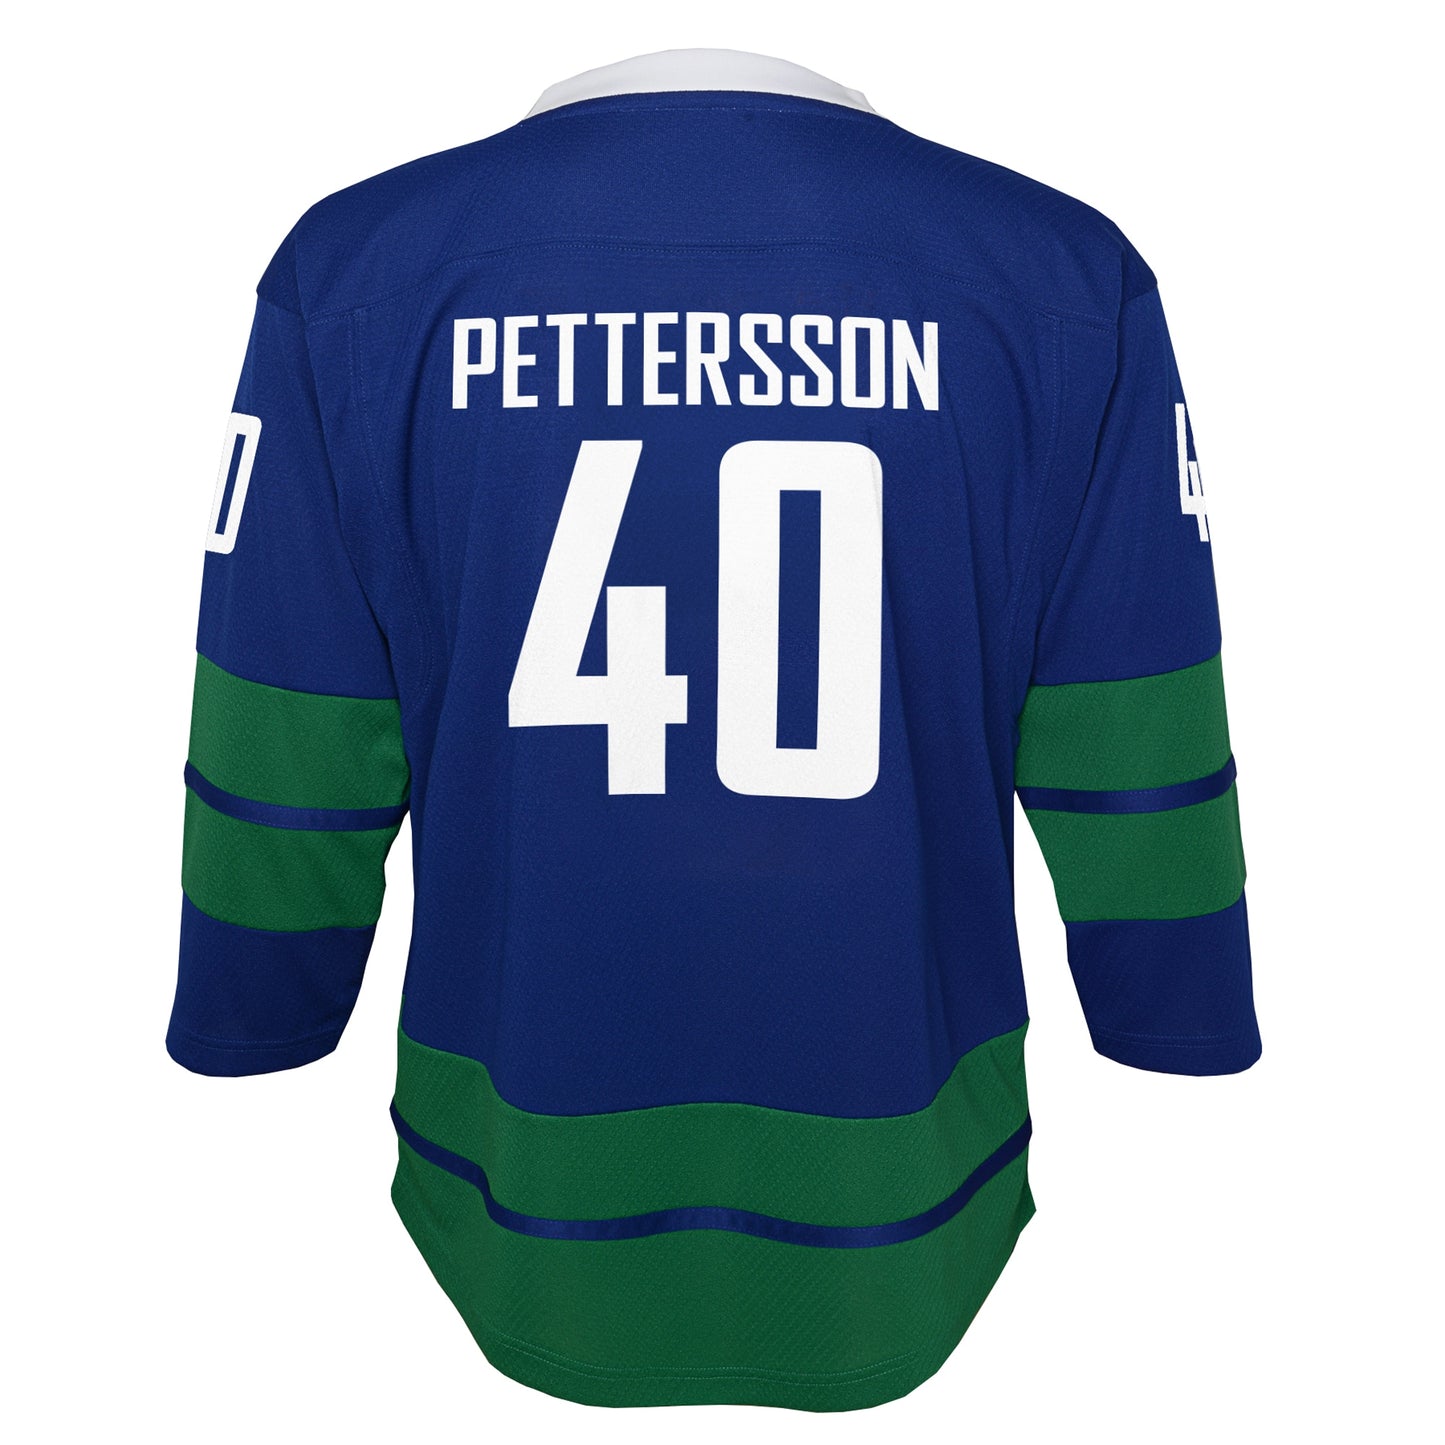 Elias Pettersson Vancouver Canucks Youth Royal 2019/20 Alternate Replica Player Jersey